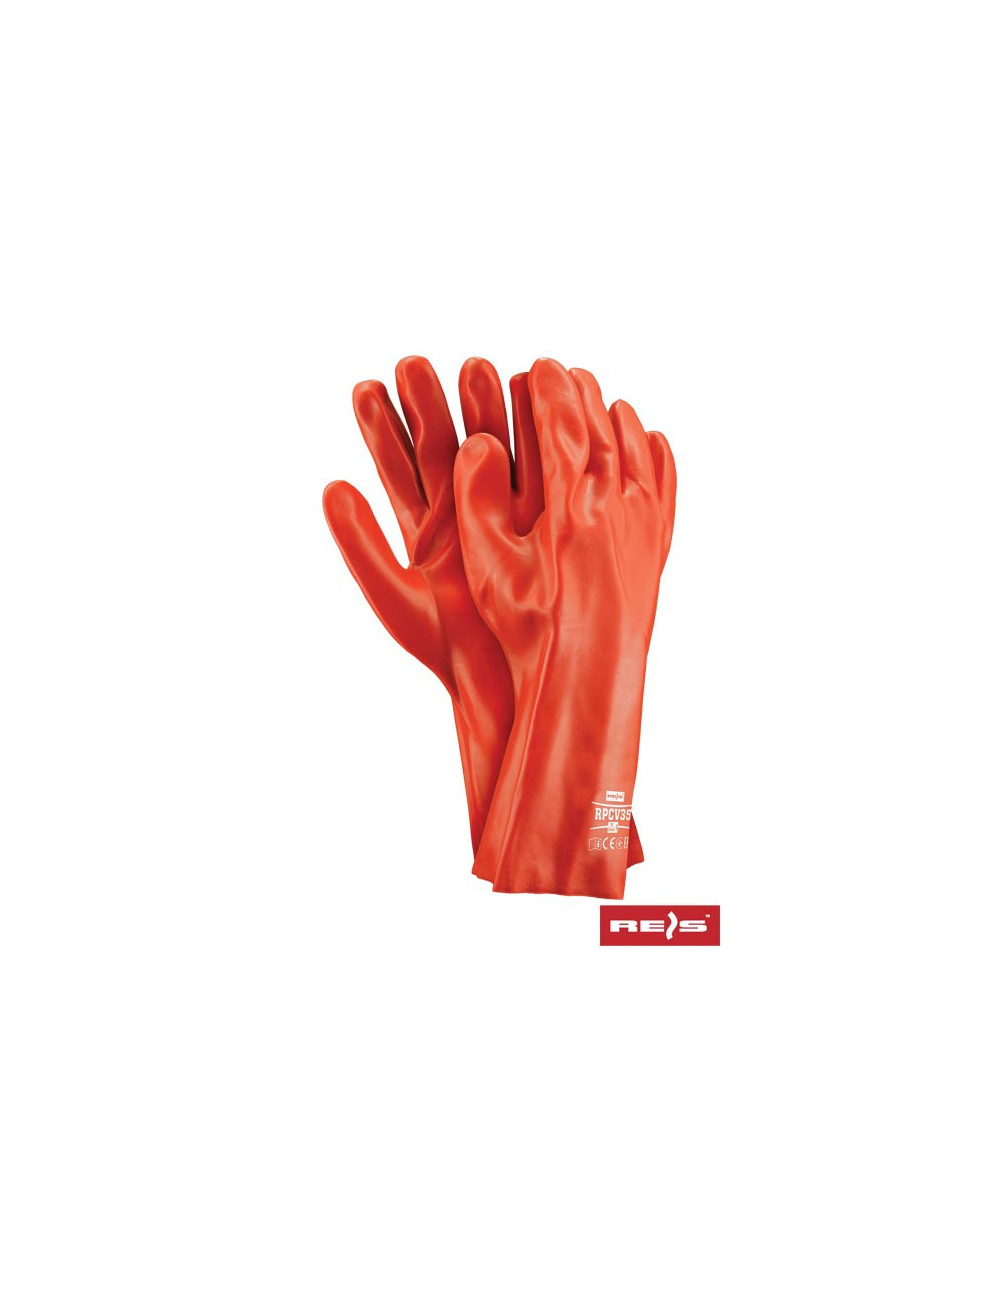 Protective gloves rpcv35 c red Reis